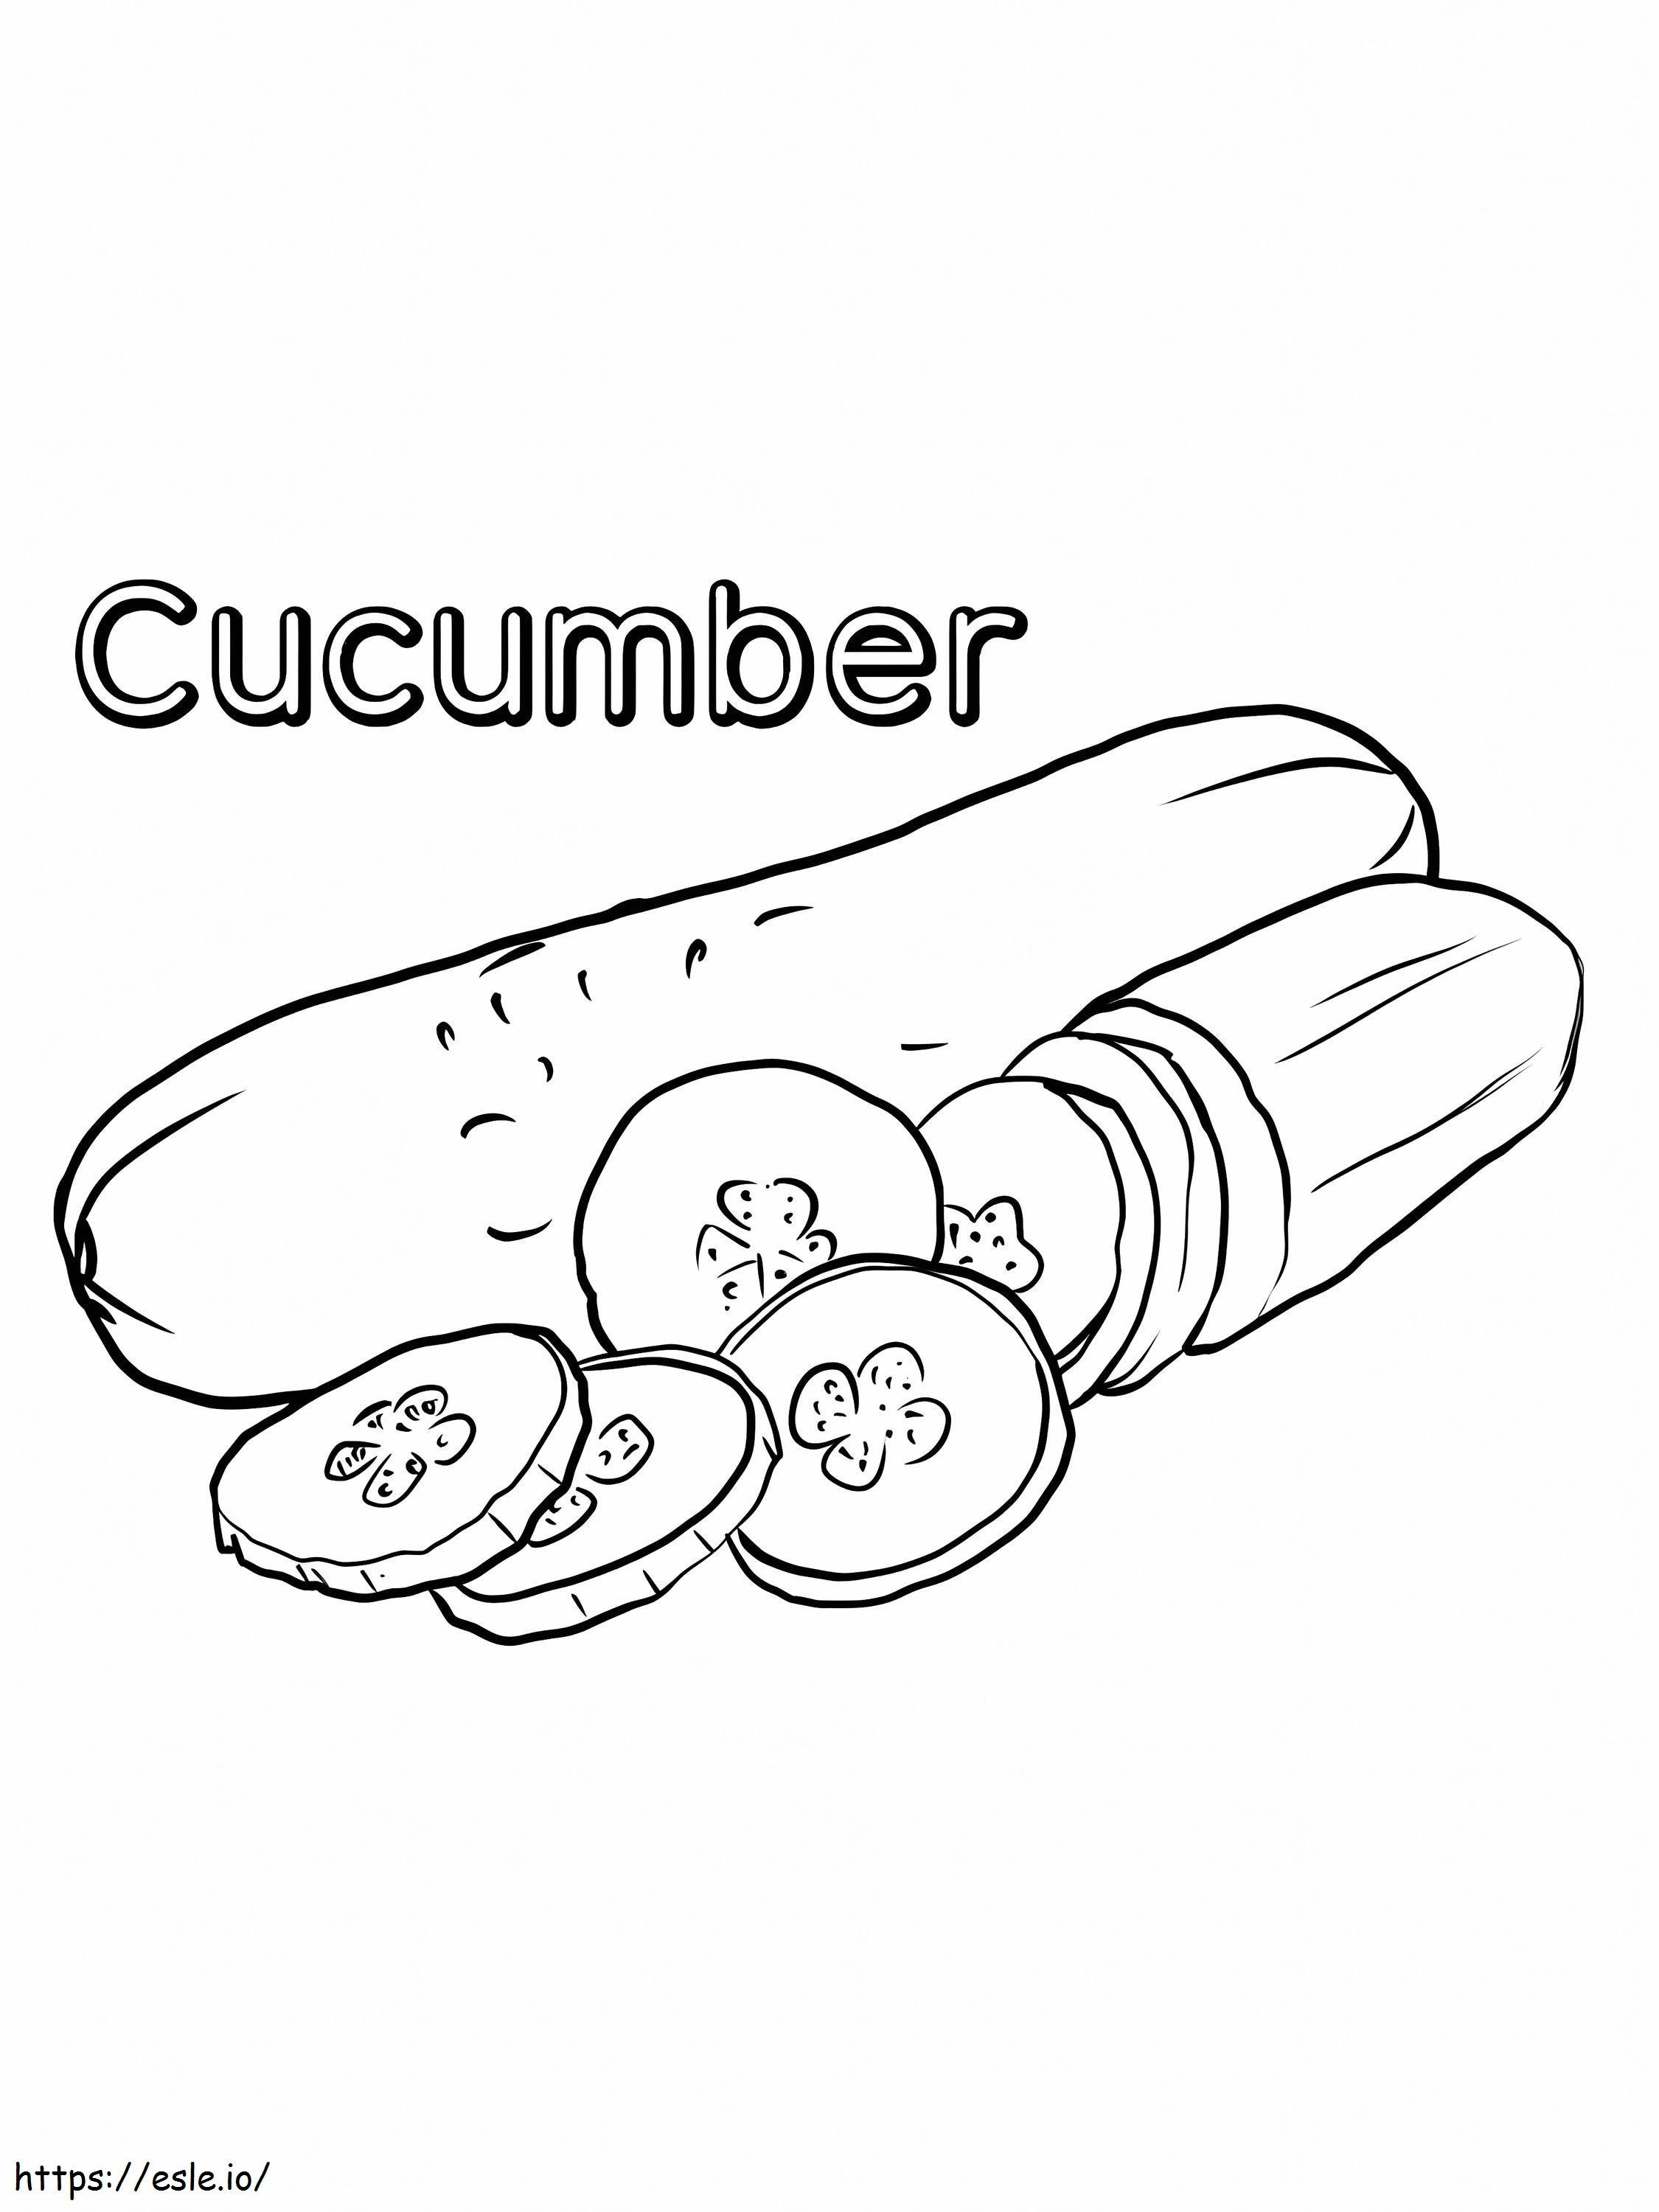 Cucumber 2. coloring page